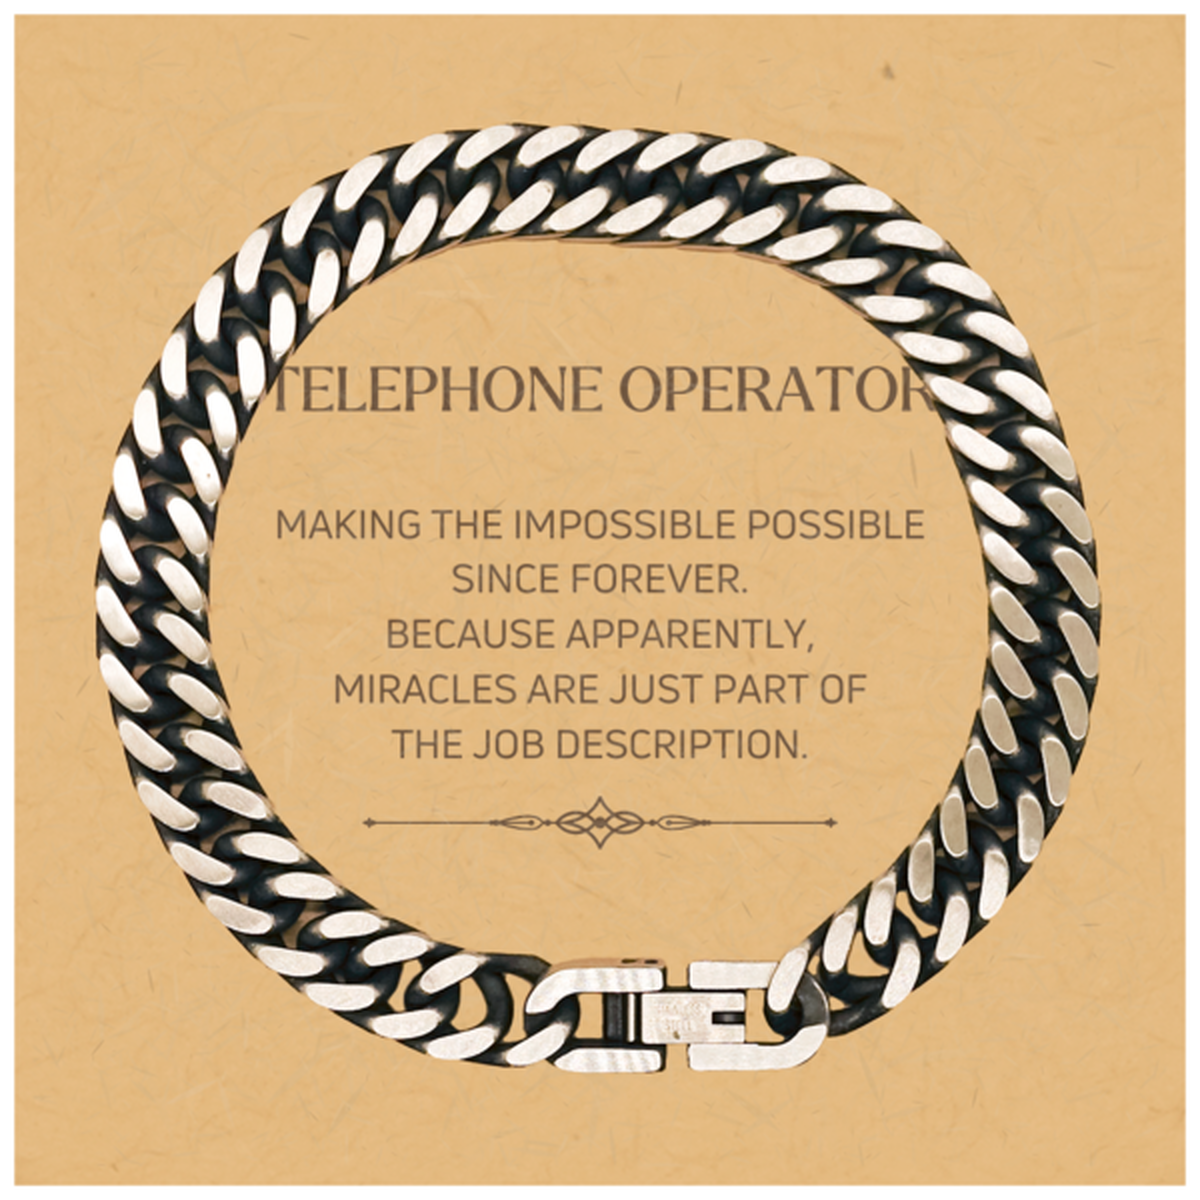 Funny Telephone Operator Gifts, Miracles are just part of the job description, Inspirational Birthday Christmas Cuban Link Chain Bracelet For Telephone Operator, Men, Women, Coworkers, Friends, Boss